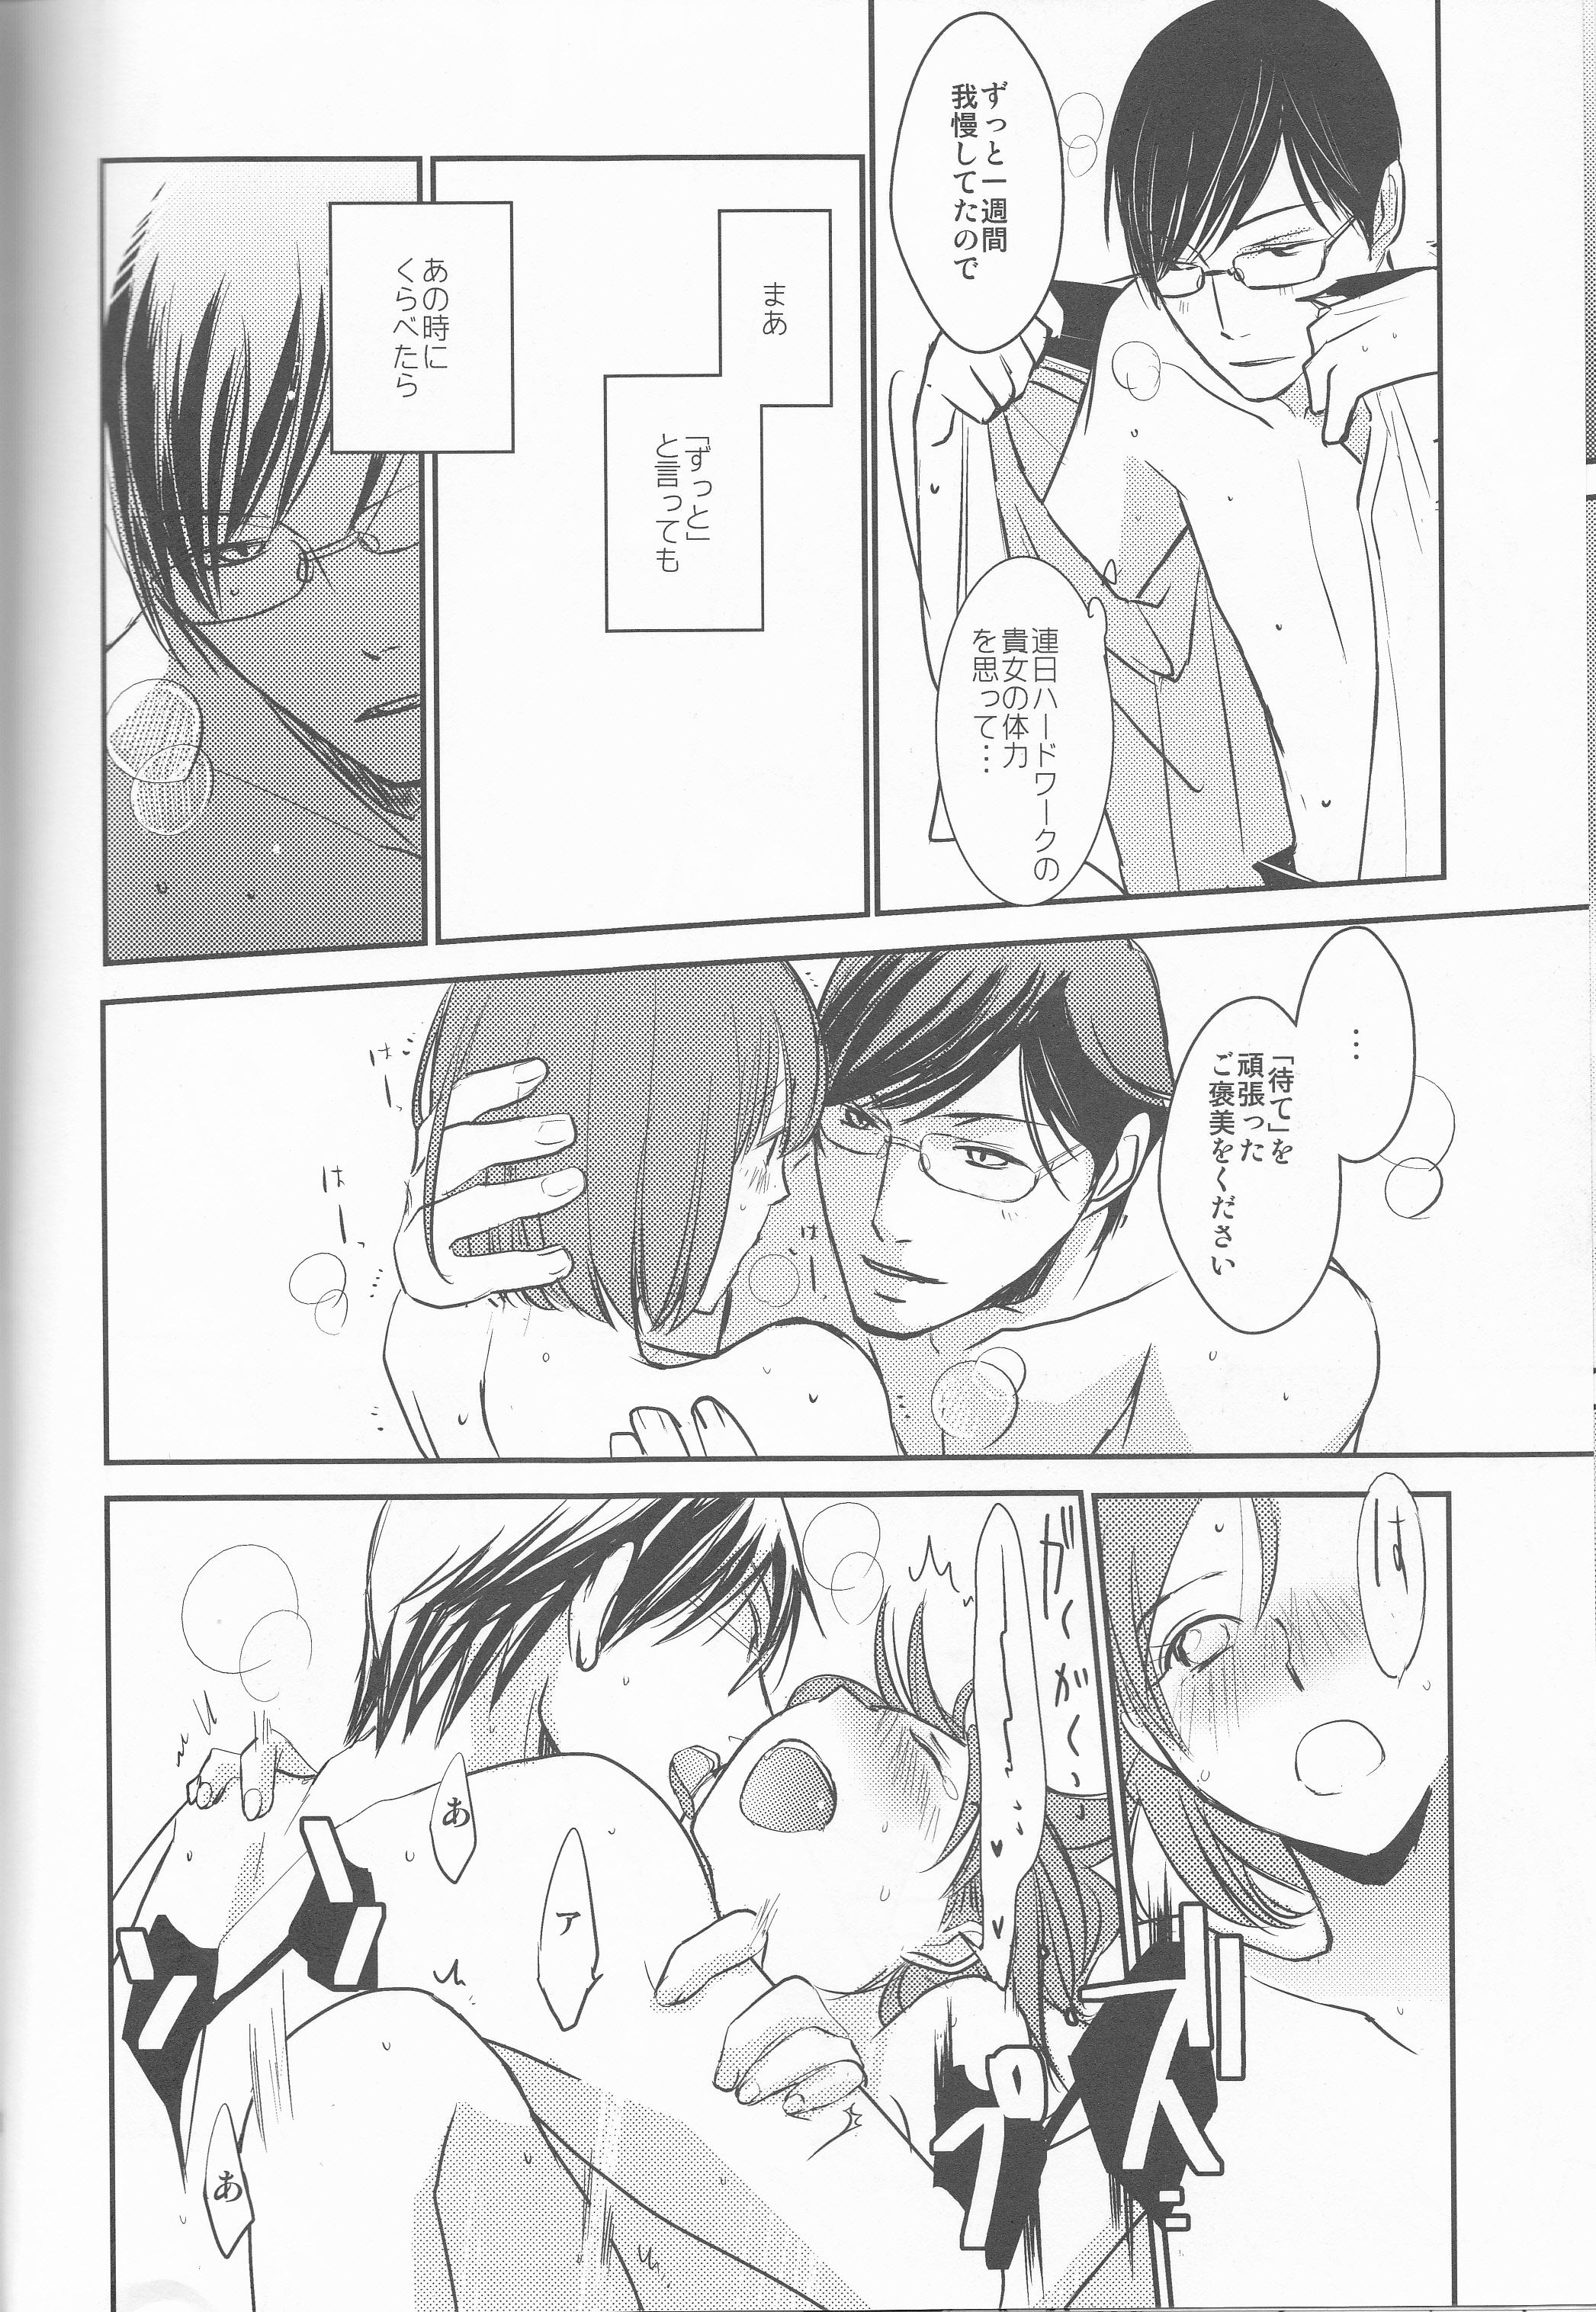 Petite darling darling darling - Scared rider xechs Hot Cunt - Page 12